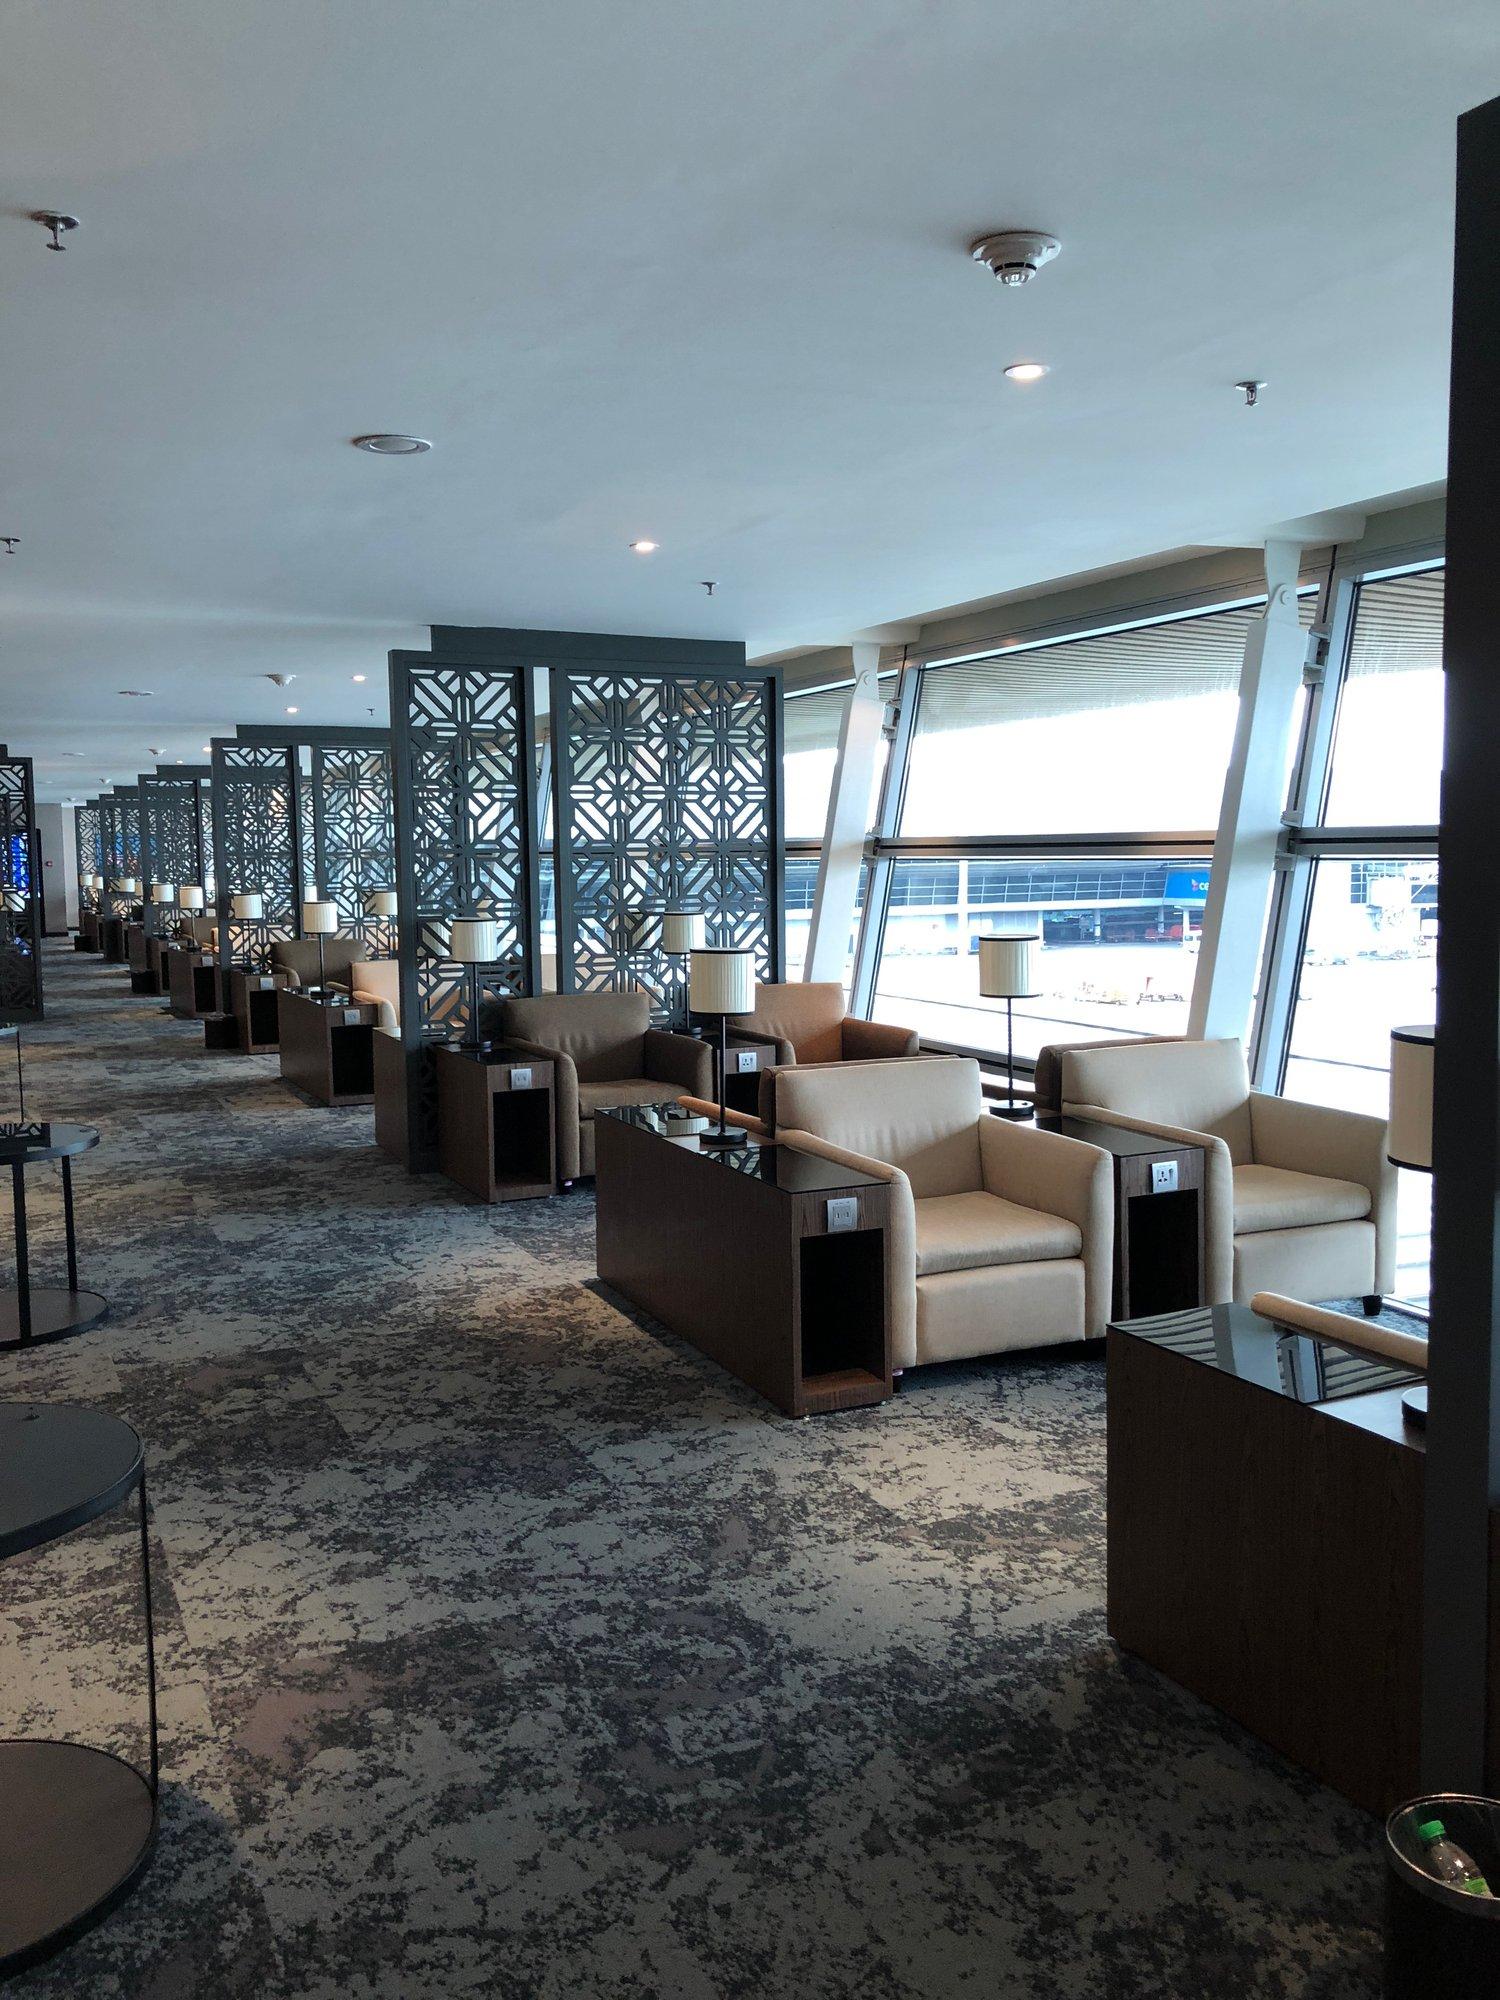 Malaysia Airlines Golden Business Class Lounge image 15 of 27